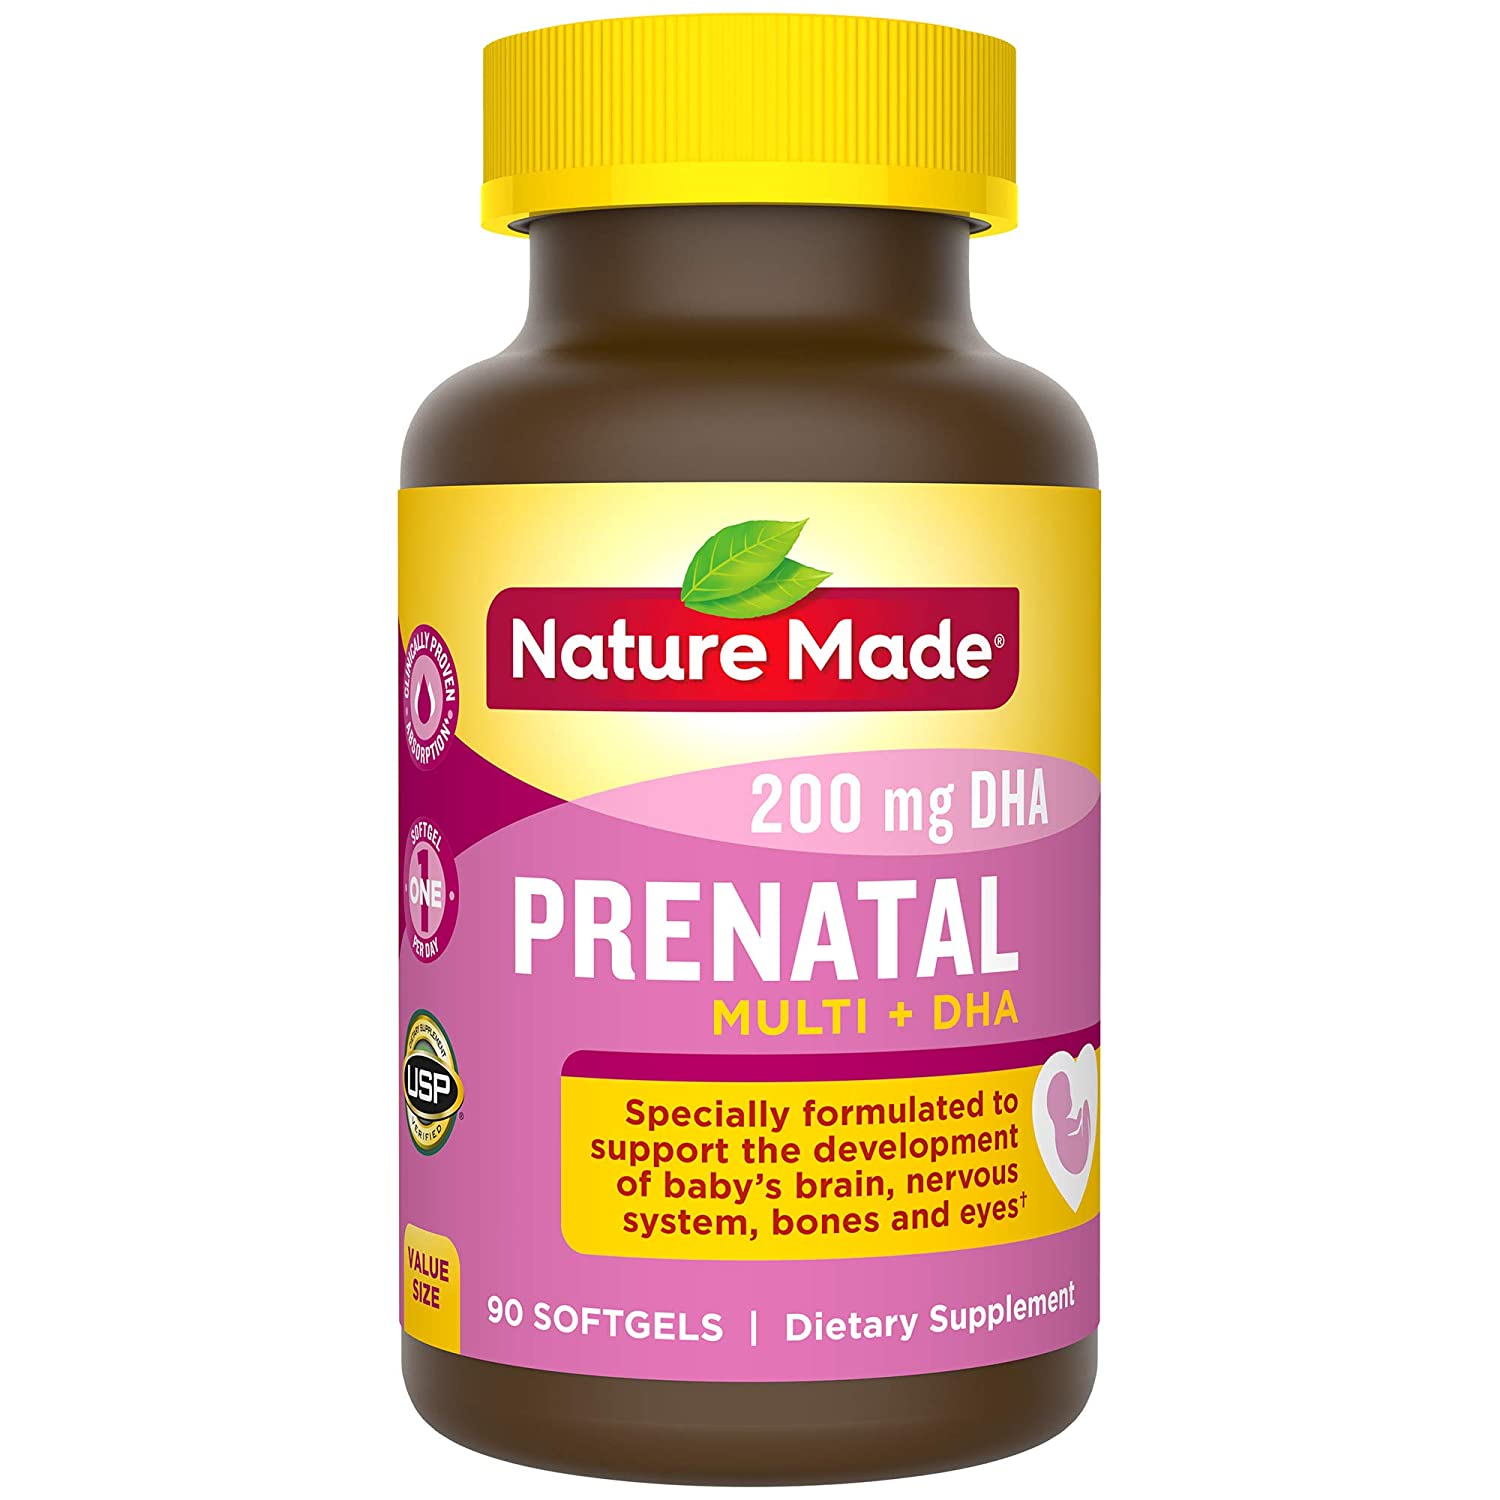 Top 9 Best Prenatal Vitamins with DHA for Pregnancy Reviews in 2022 1